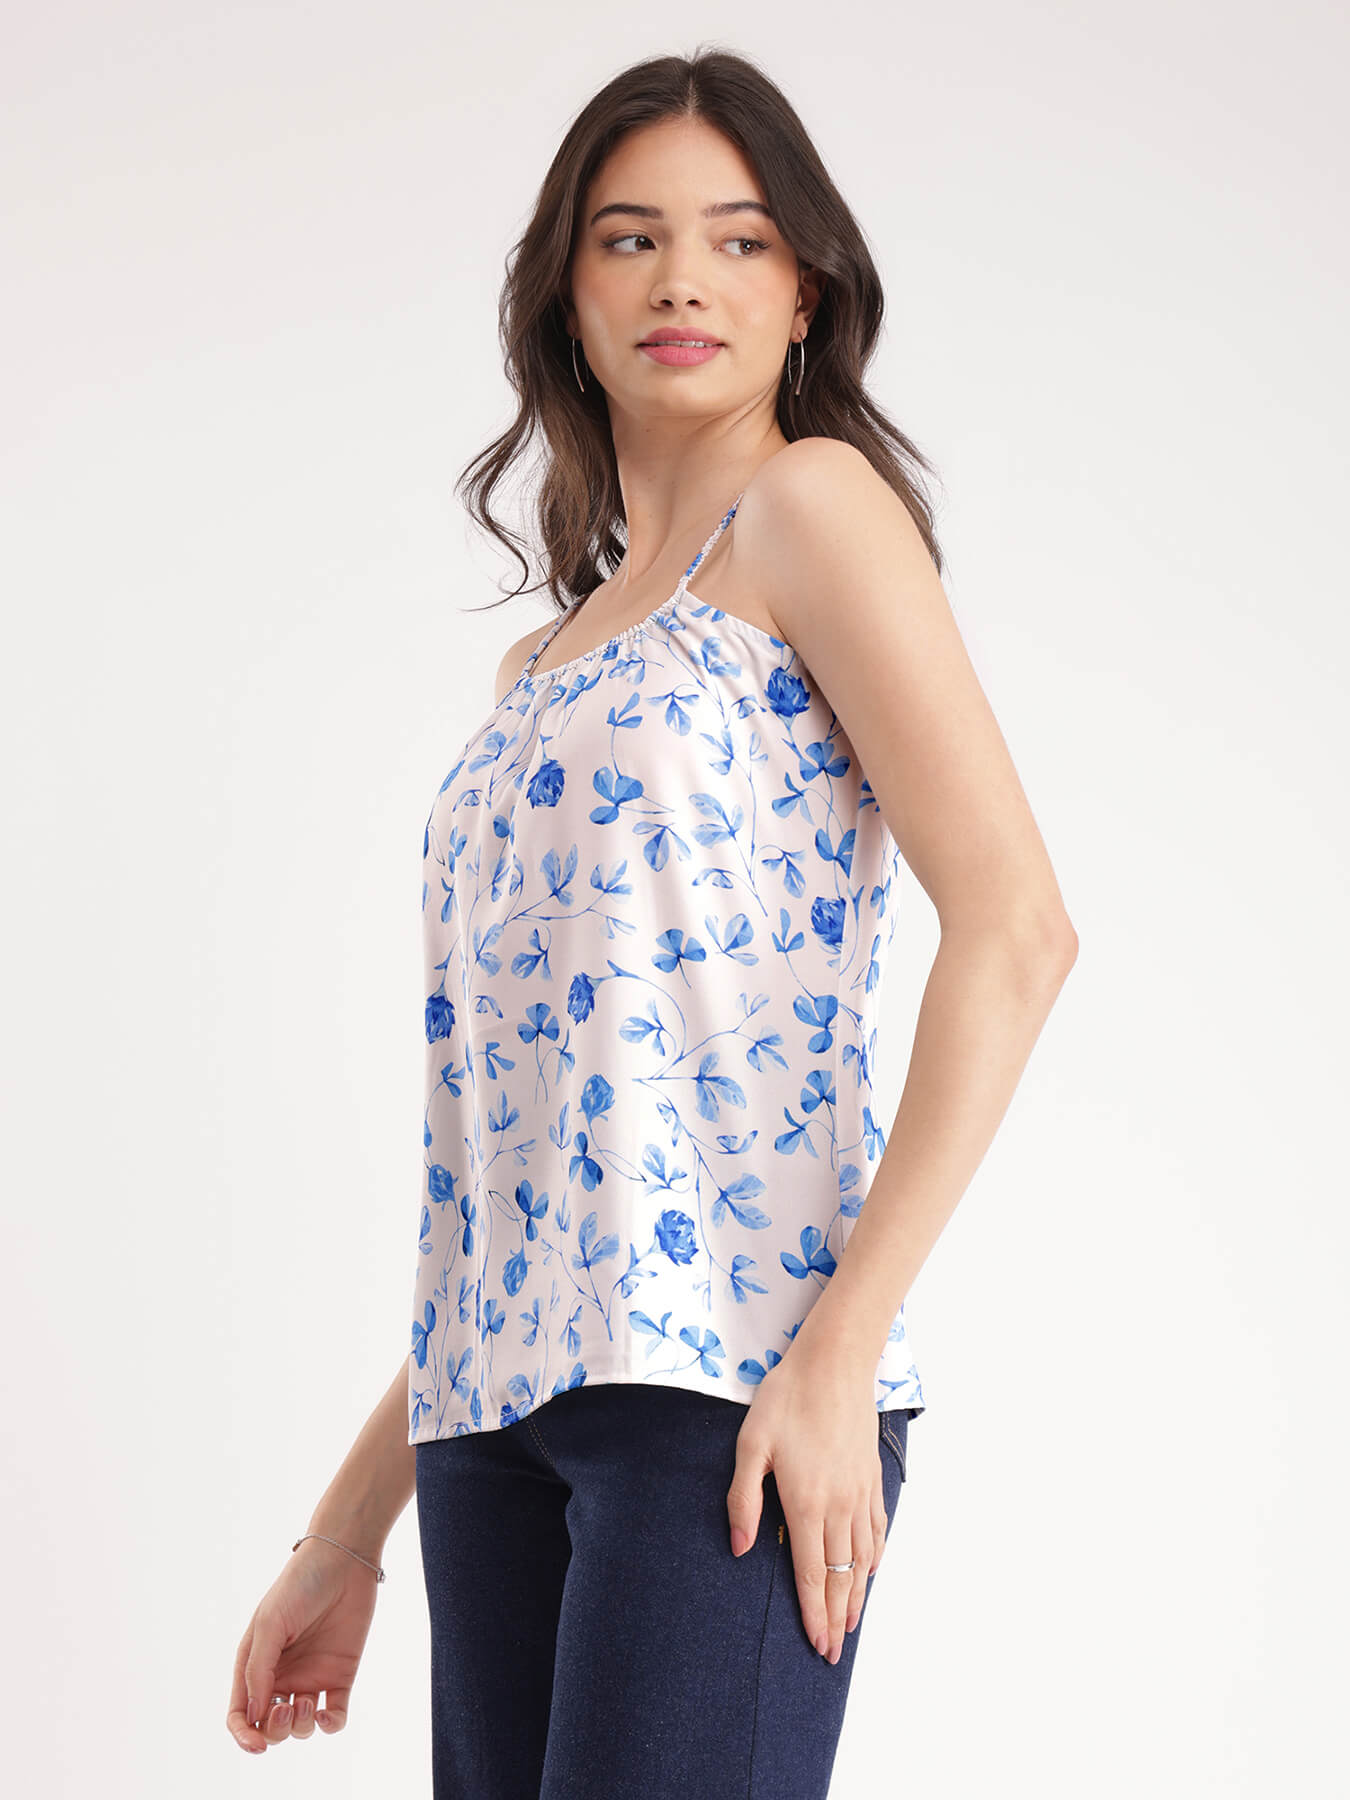 Floral Cami Top - Blue And White